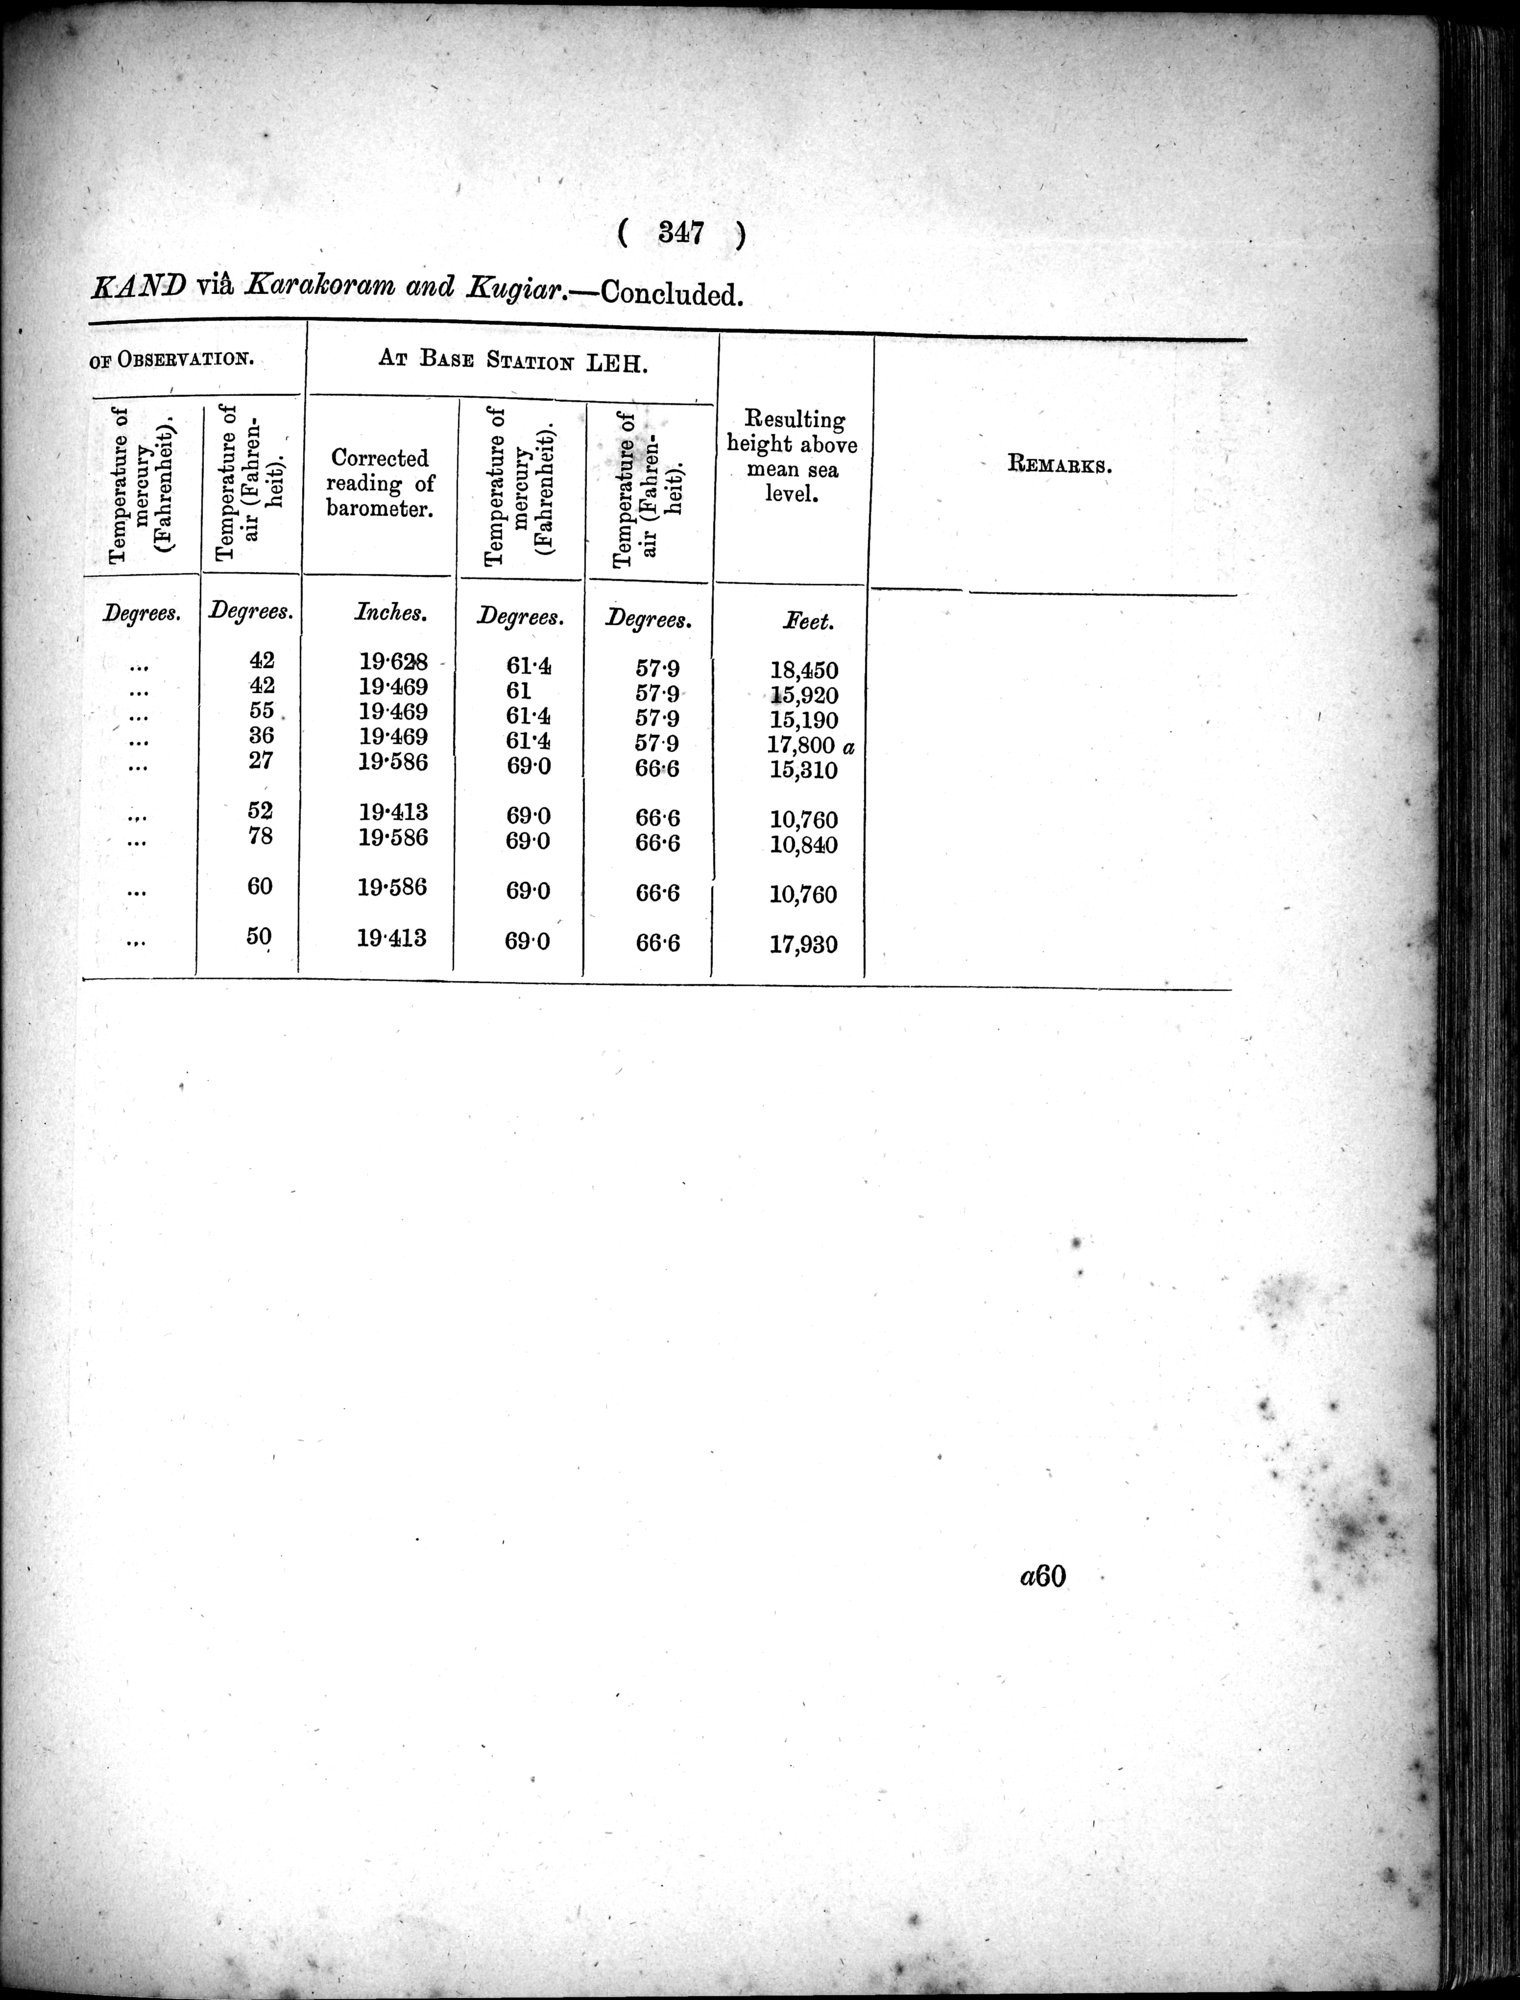 Report of a Mission to Yarkund in 1873 : vol.1 / Page 481 (Grayscale High Resolution Image)